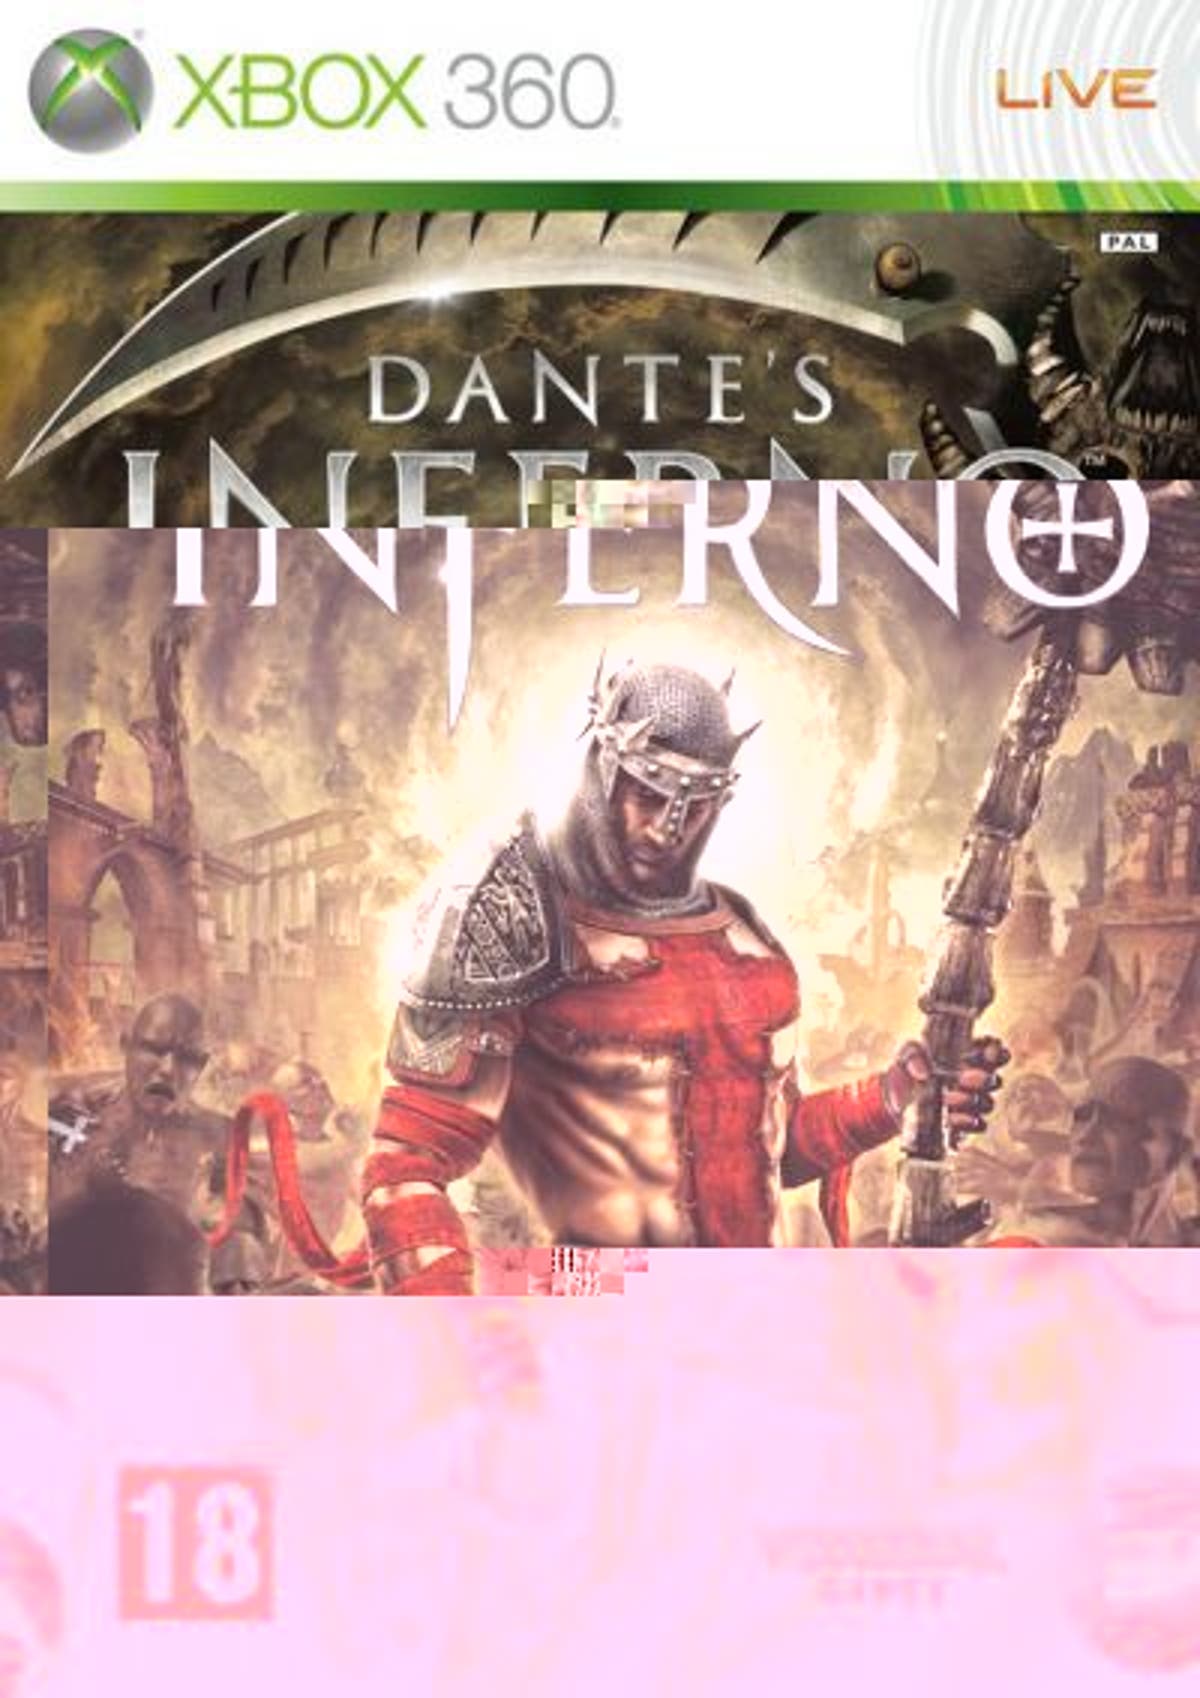 Dante's Inferno - Divine Edition (Sony PlayStation 3, 2010) for sale online